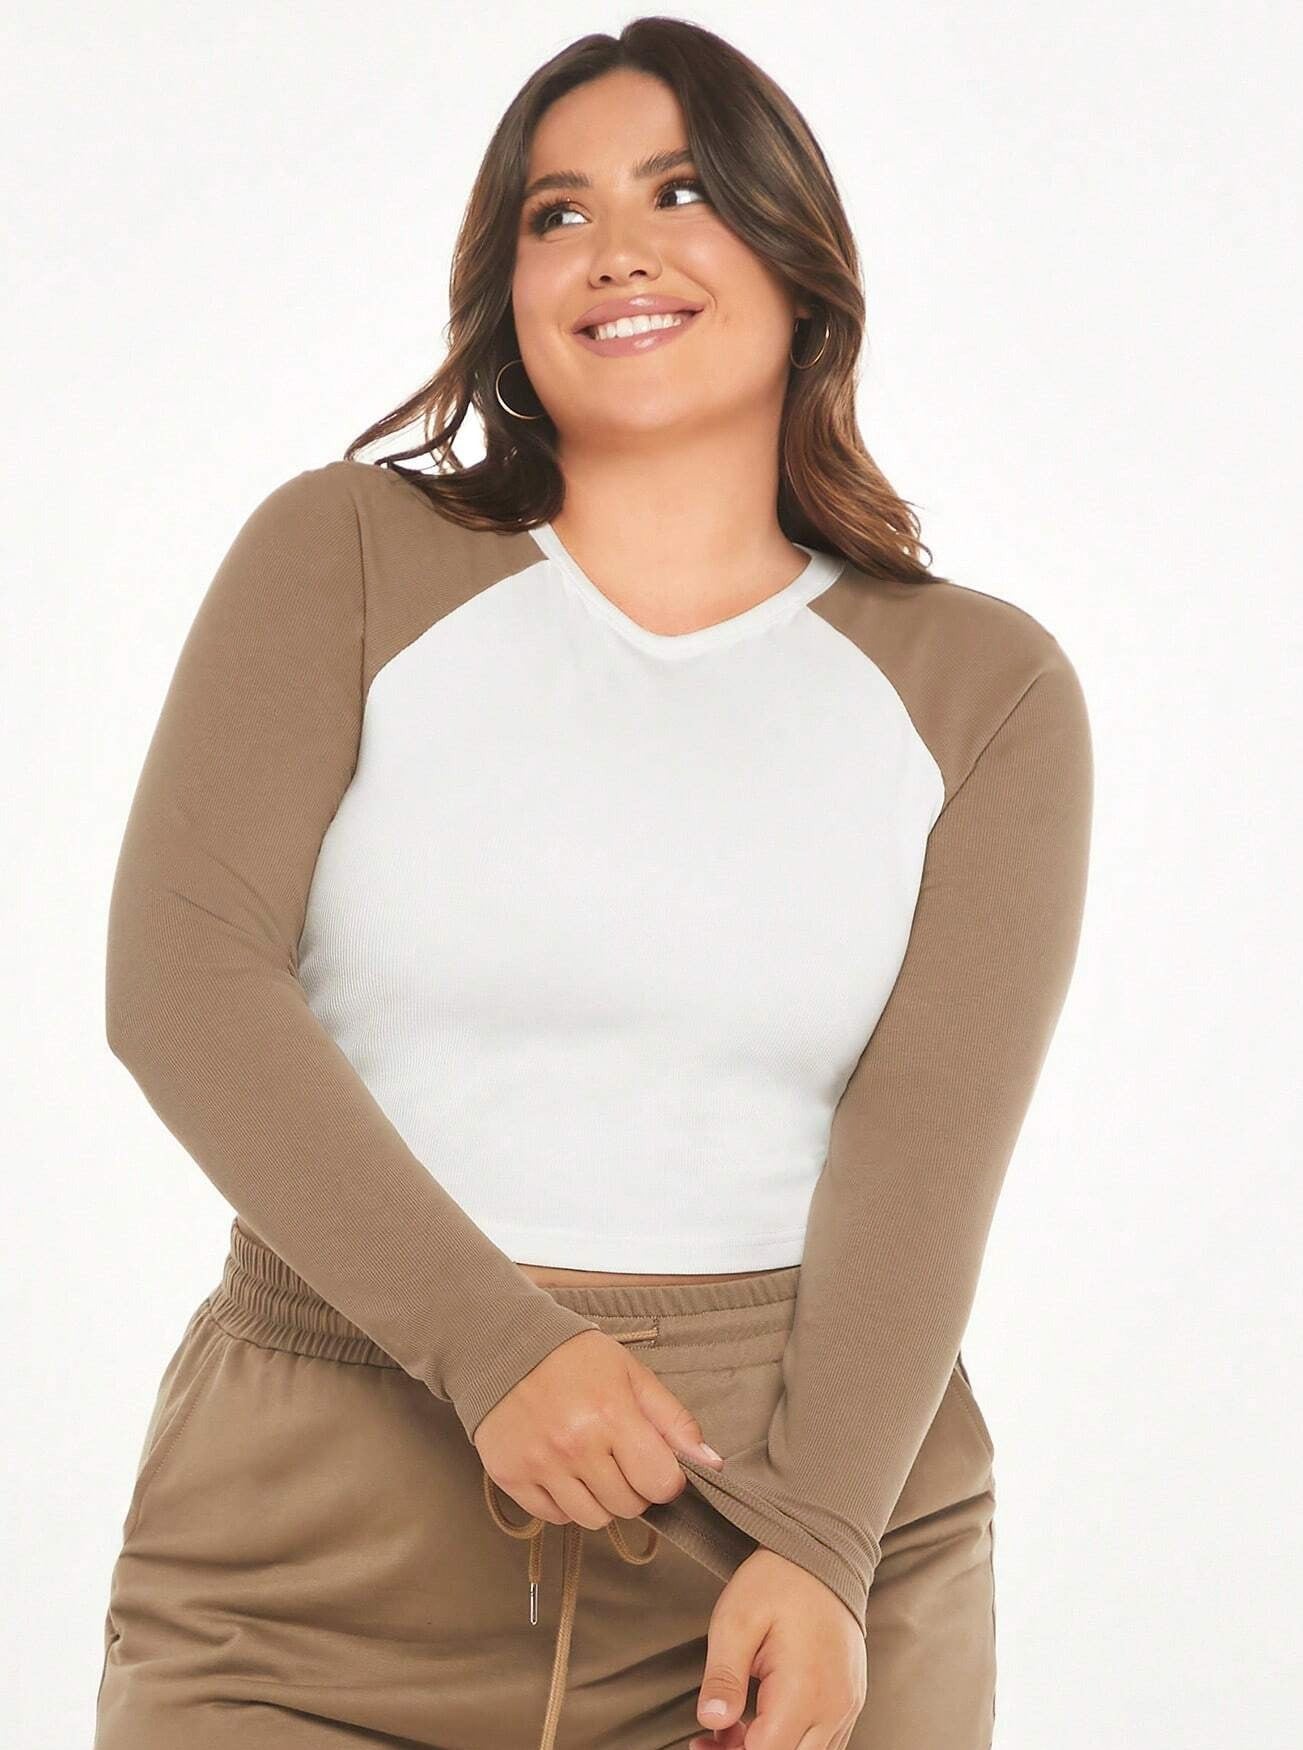 Plus Sized Contrasting Color Winter Round Neck Long-Sleeved Top